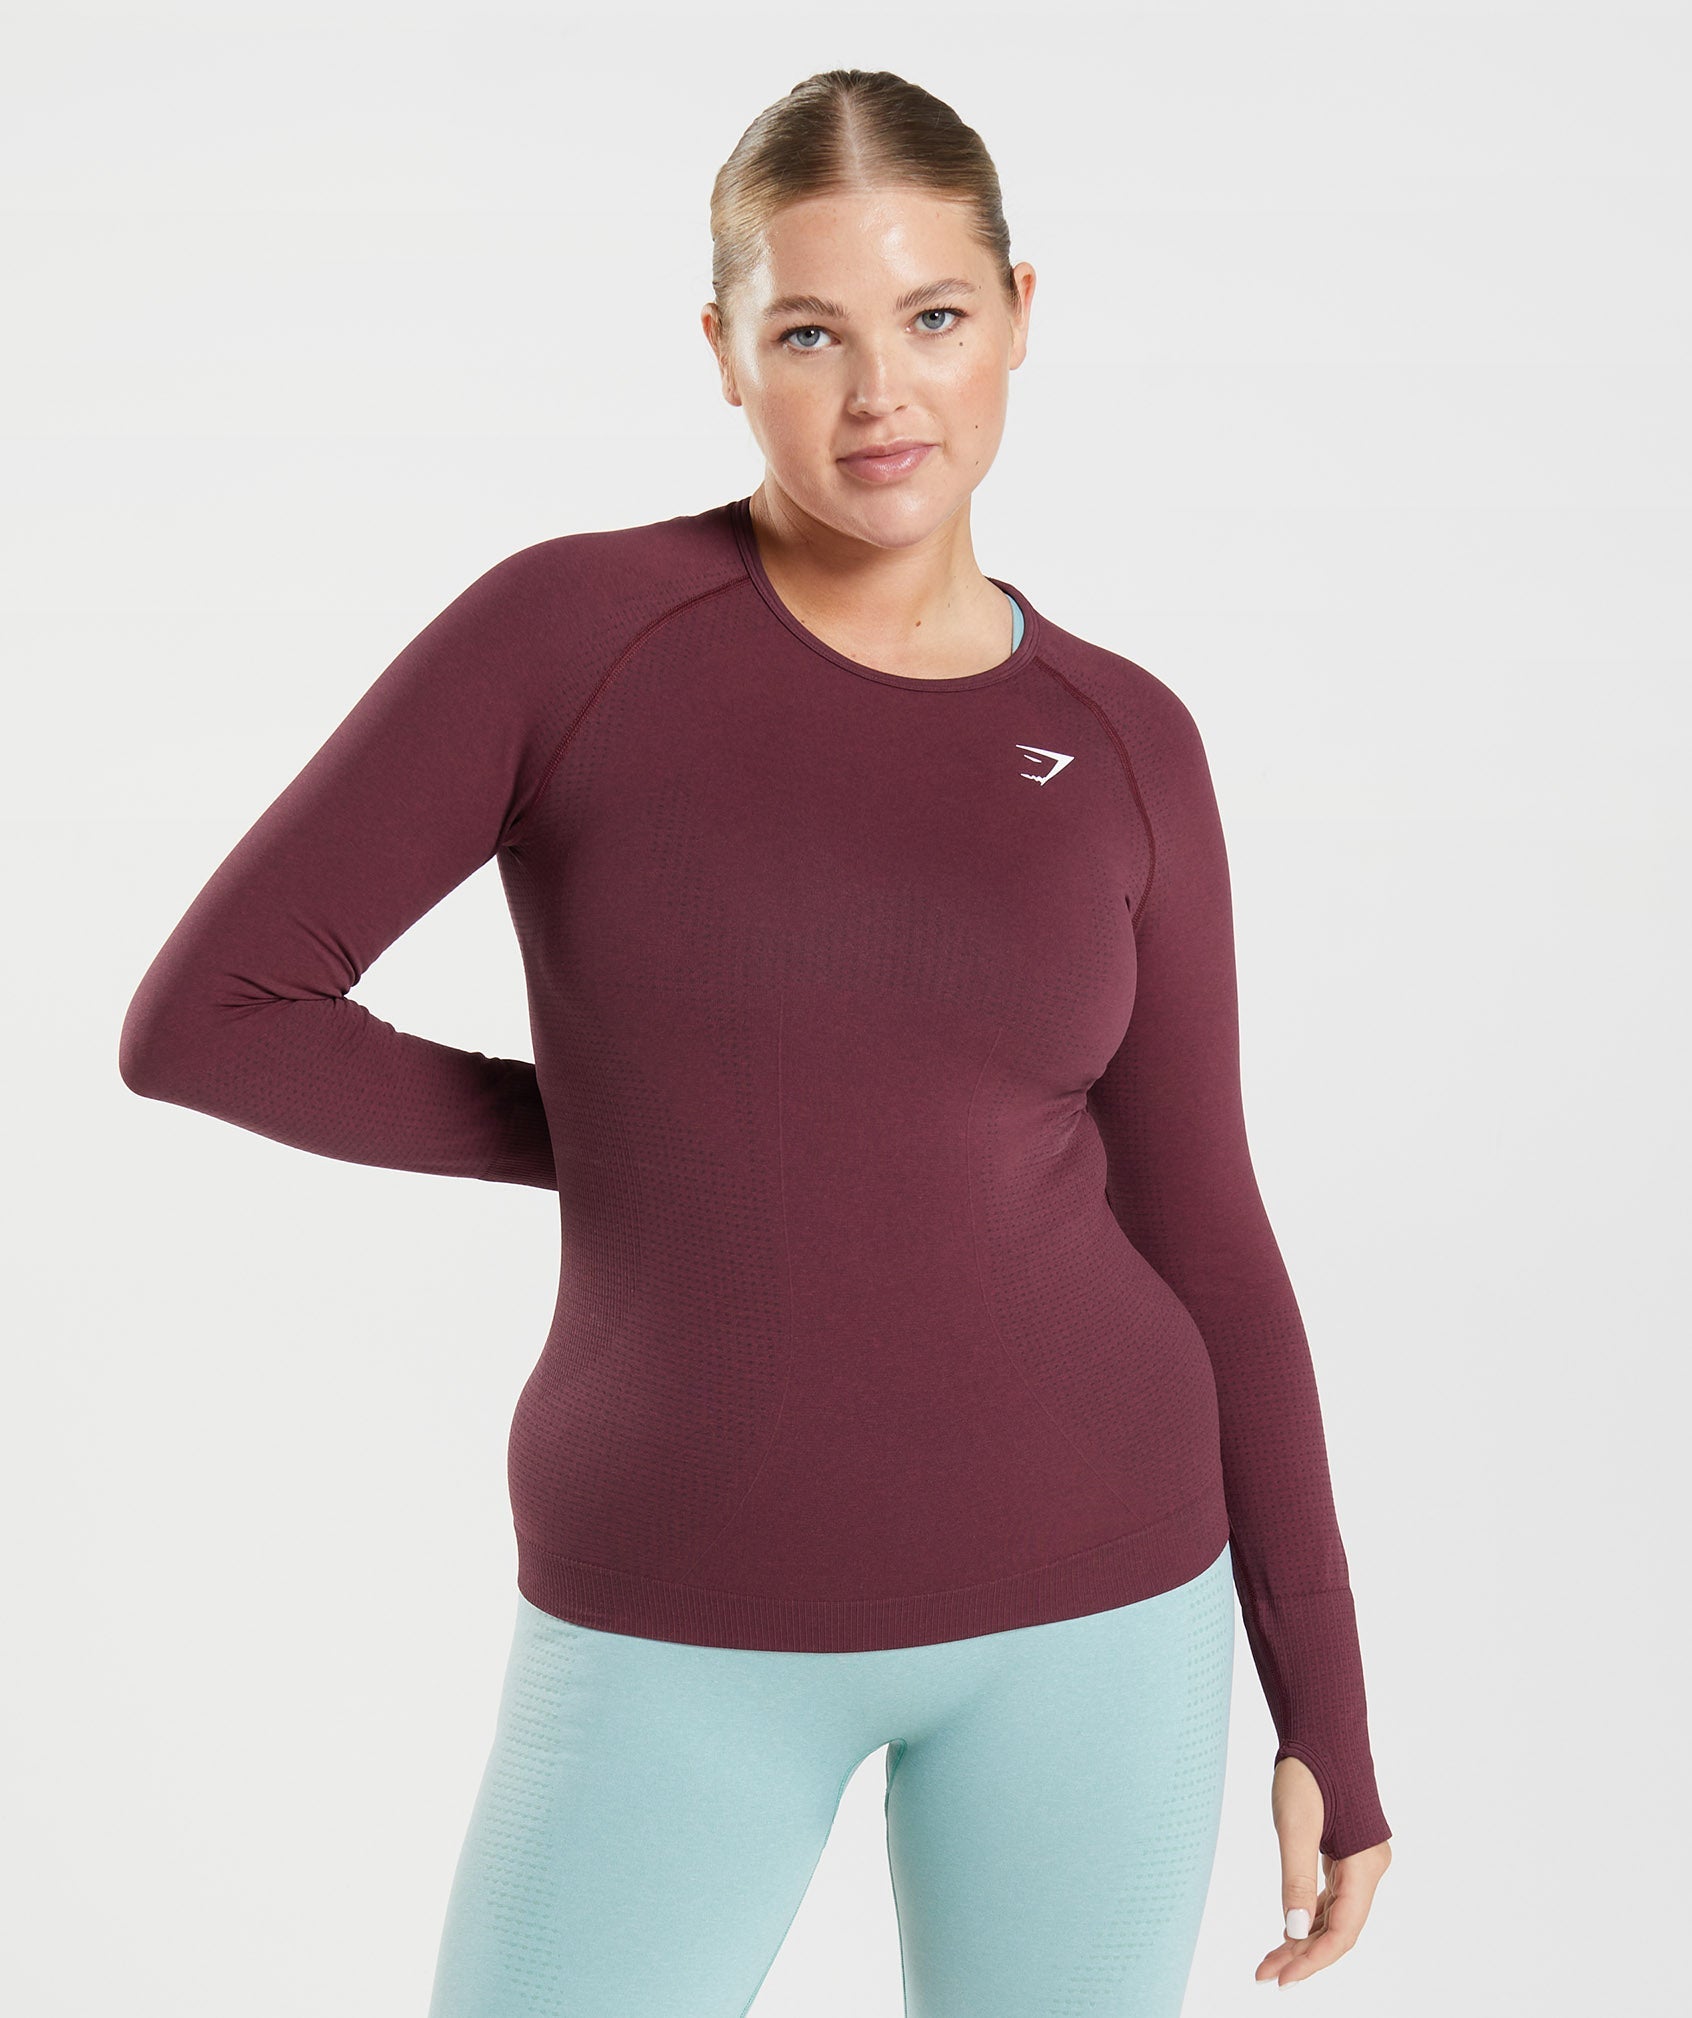 Vital Seamless 2.0 Long Sleeve Top in Baked Maroon Marl is out of stock